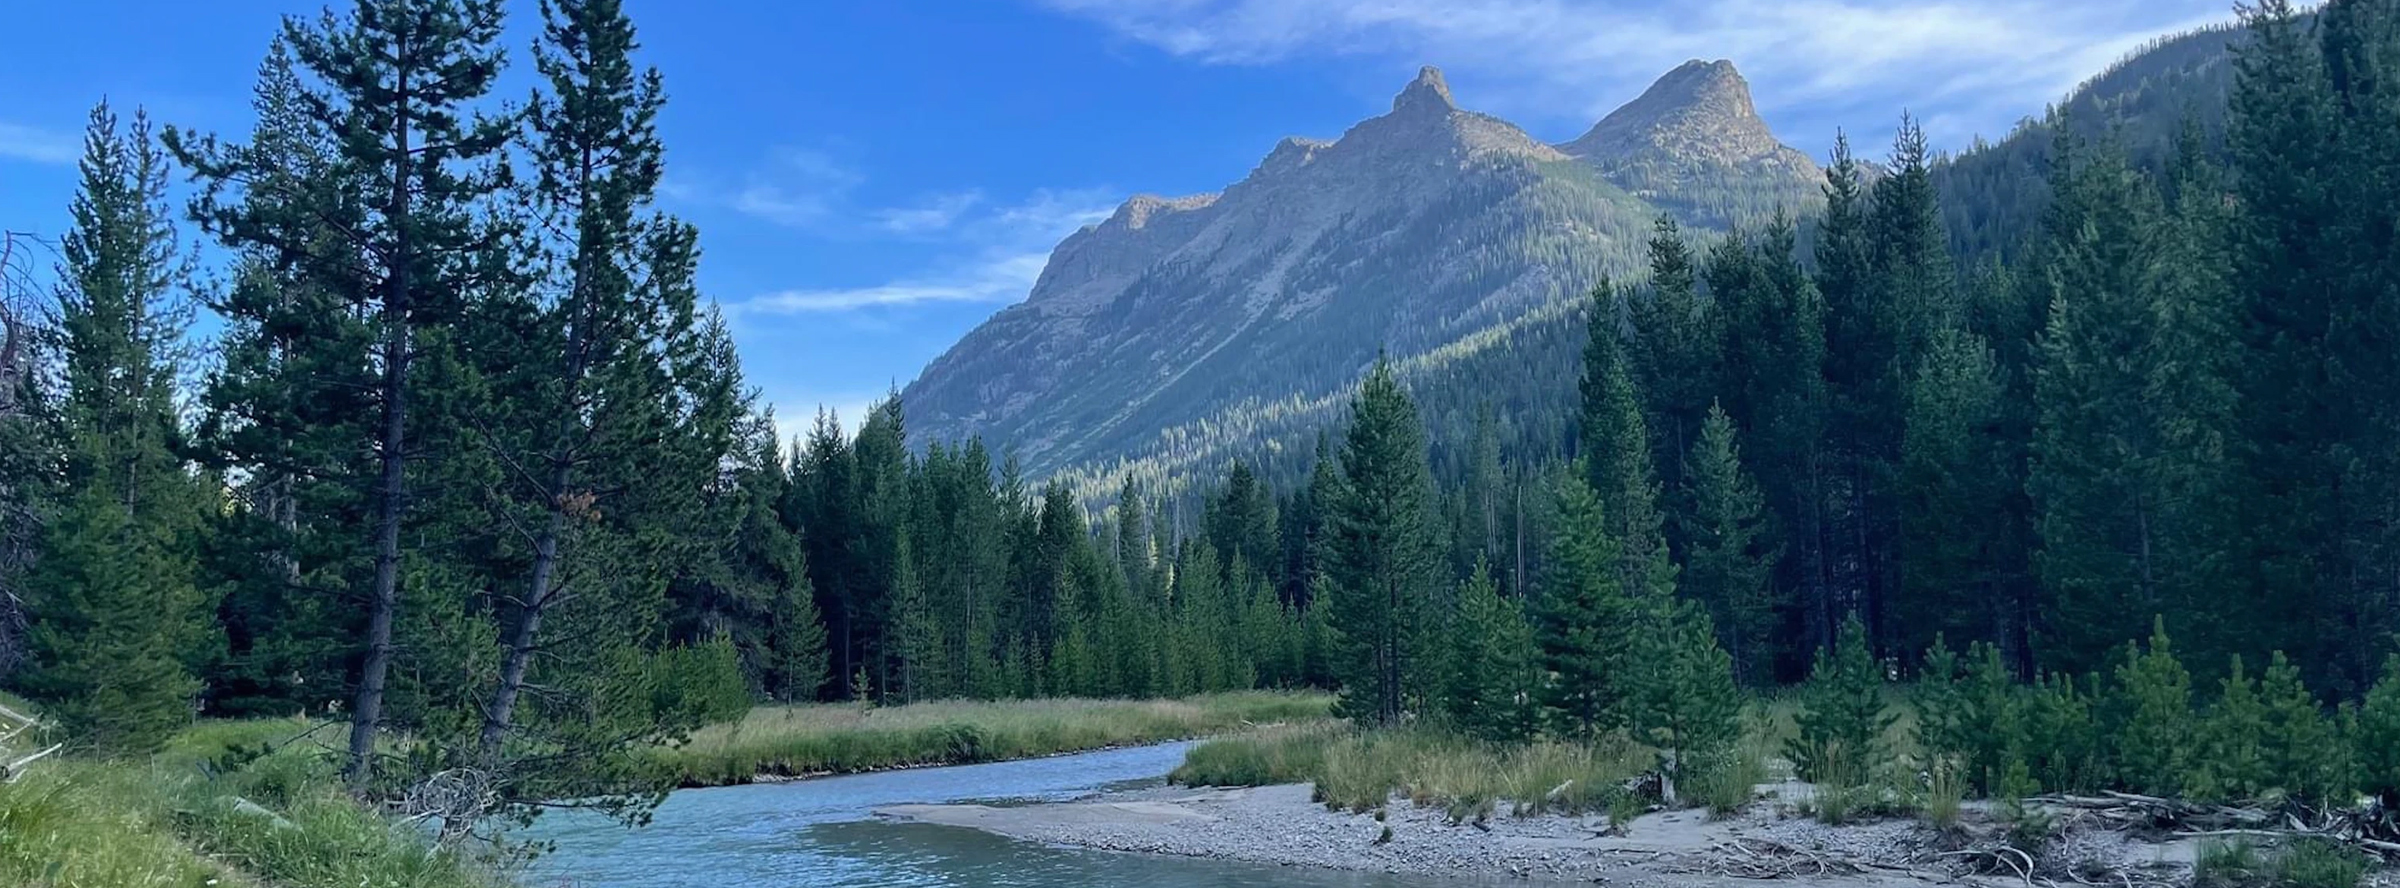 River and mountains in Wyoming